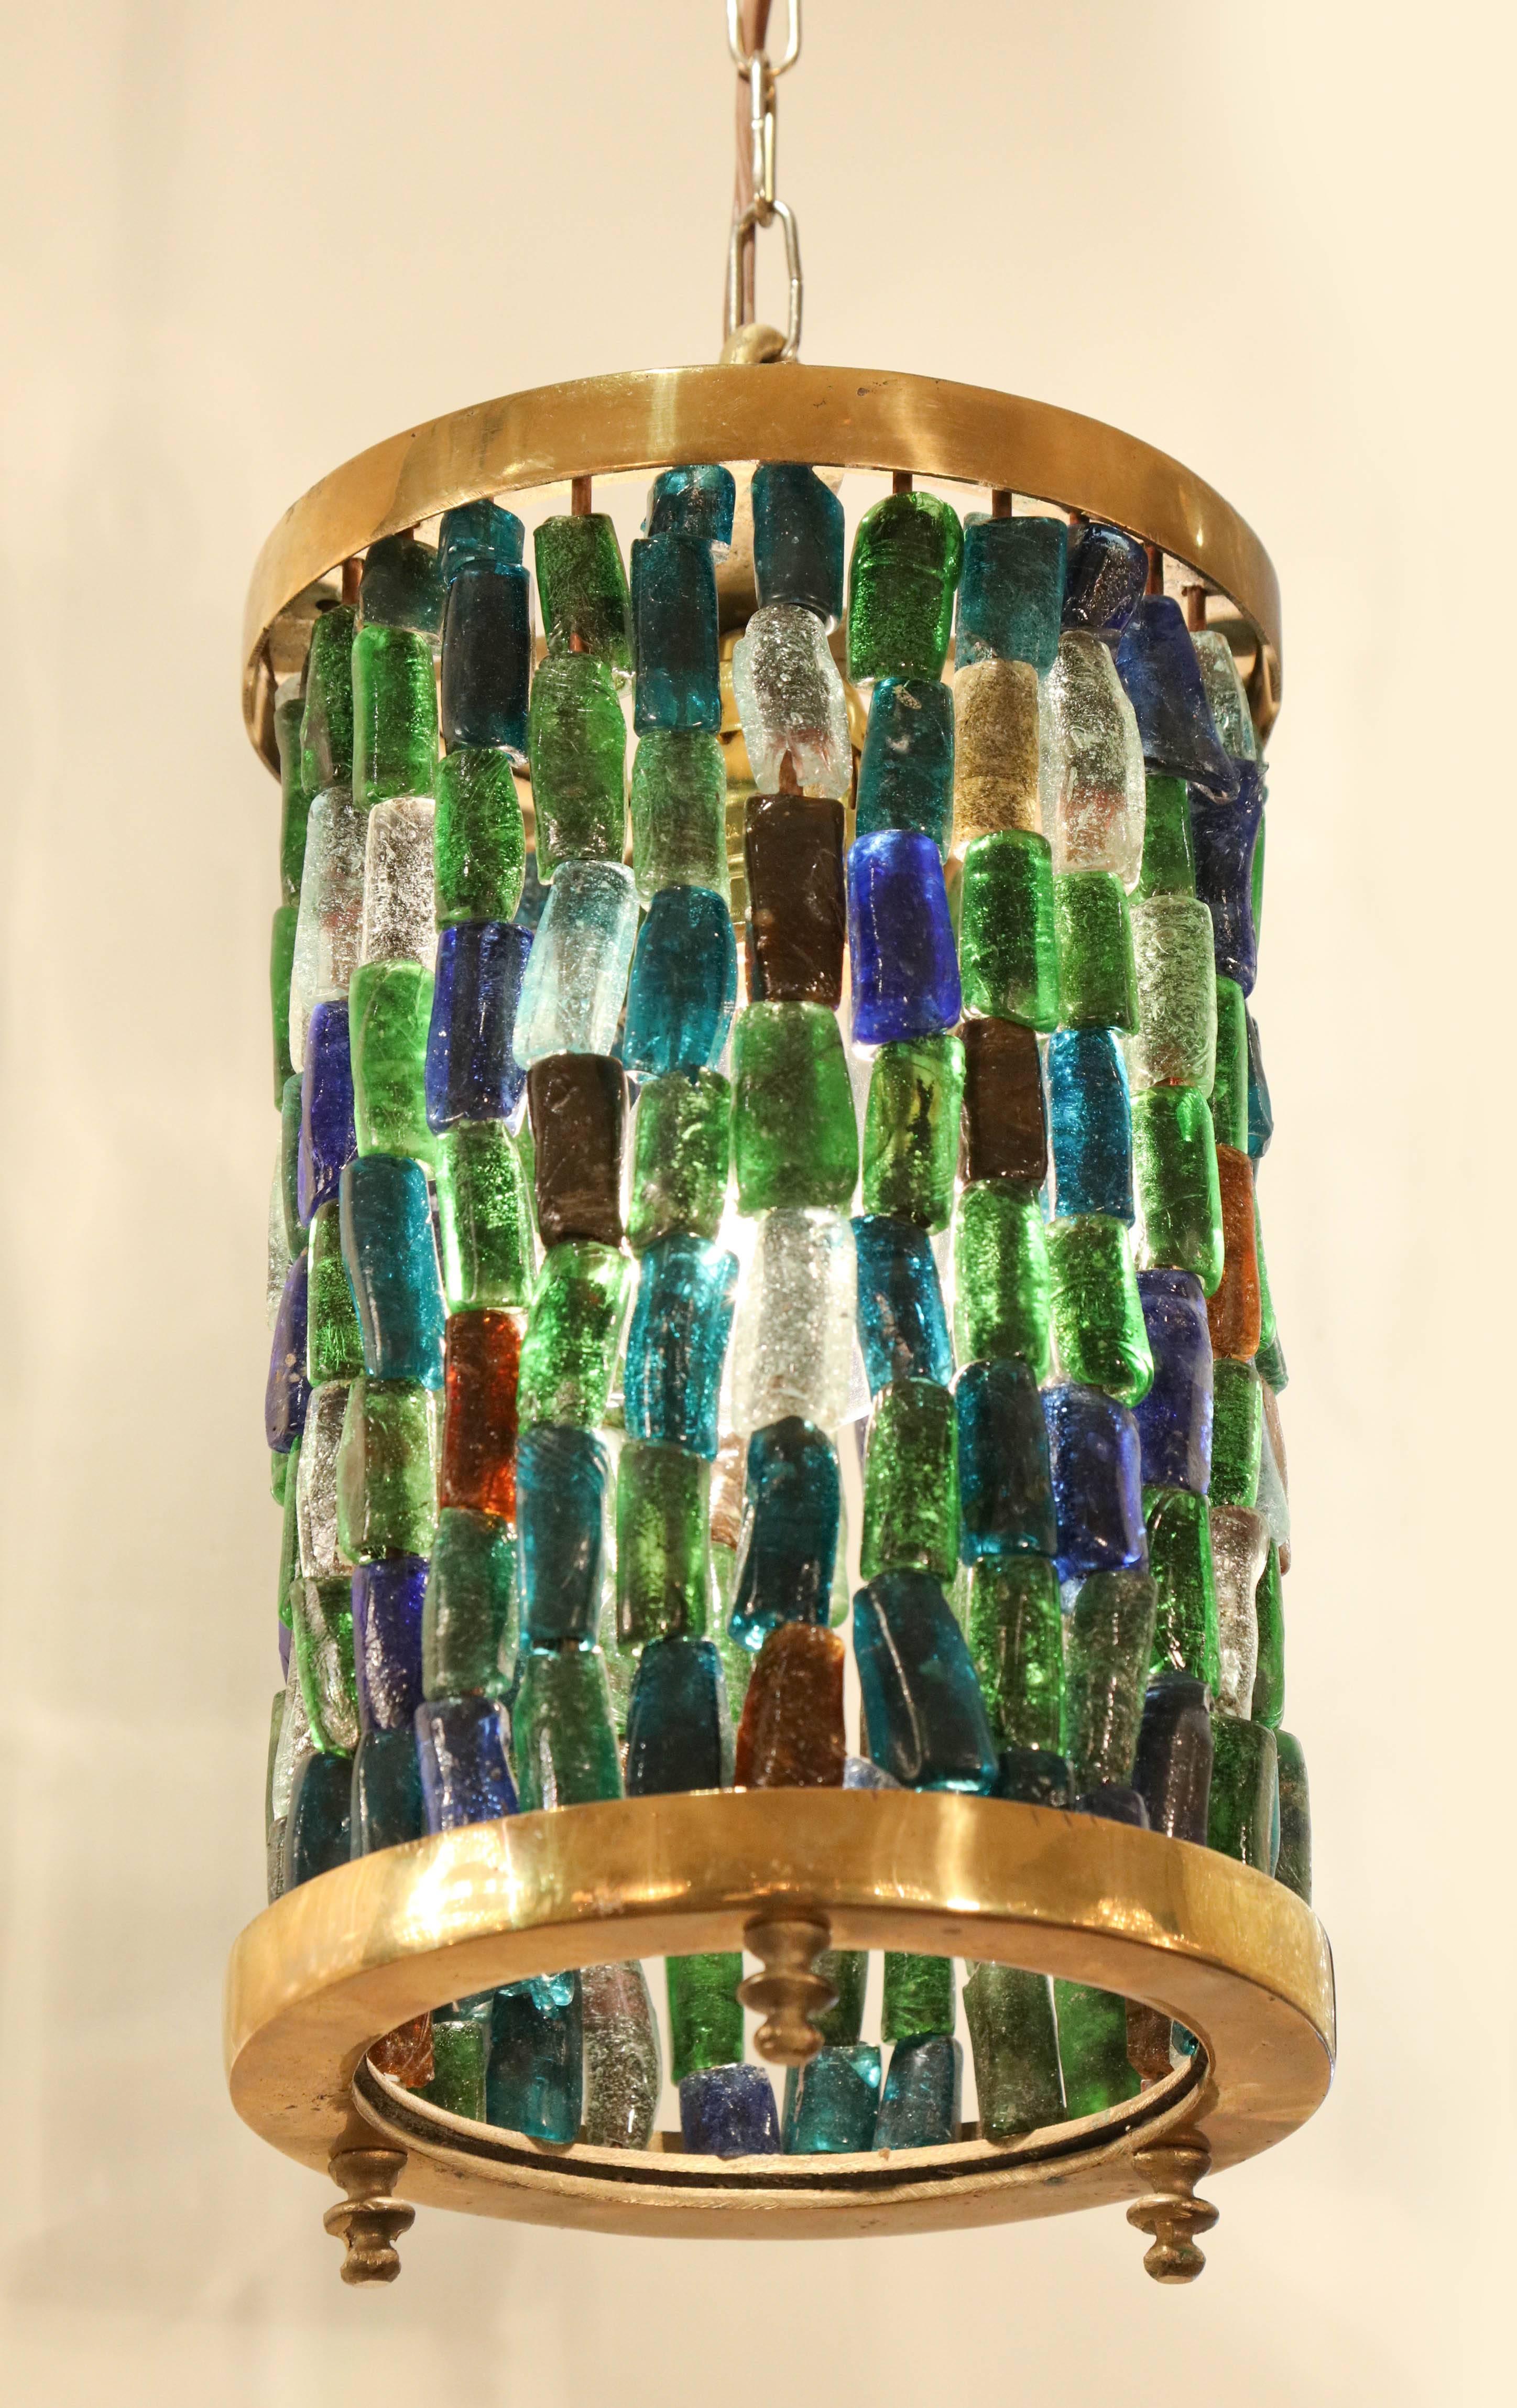 A lovely small lantern composed of a brass cylinder and small pieces of colored glass in stunning shades of blue, green, amber and clear.